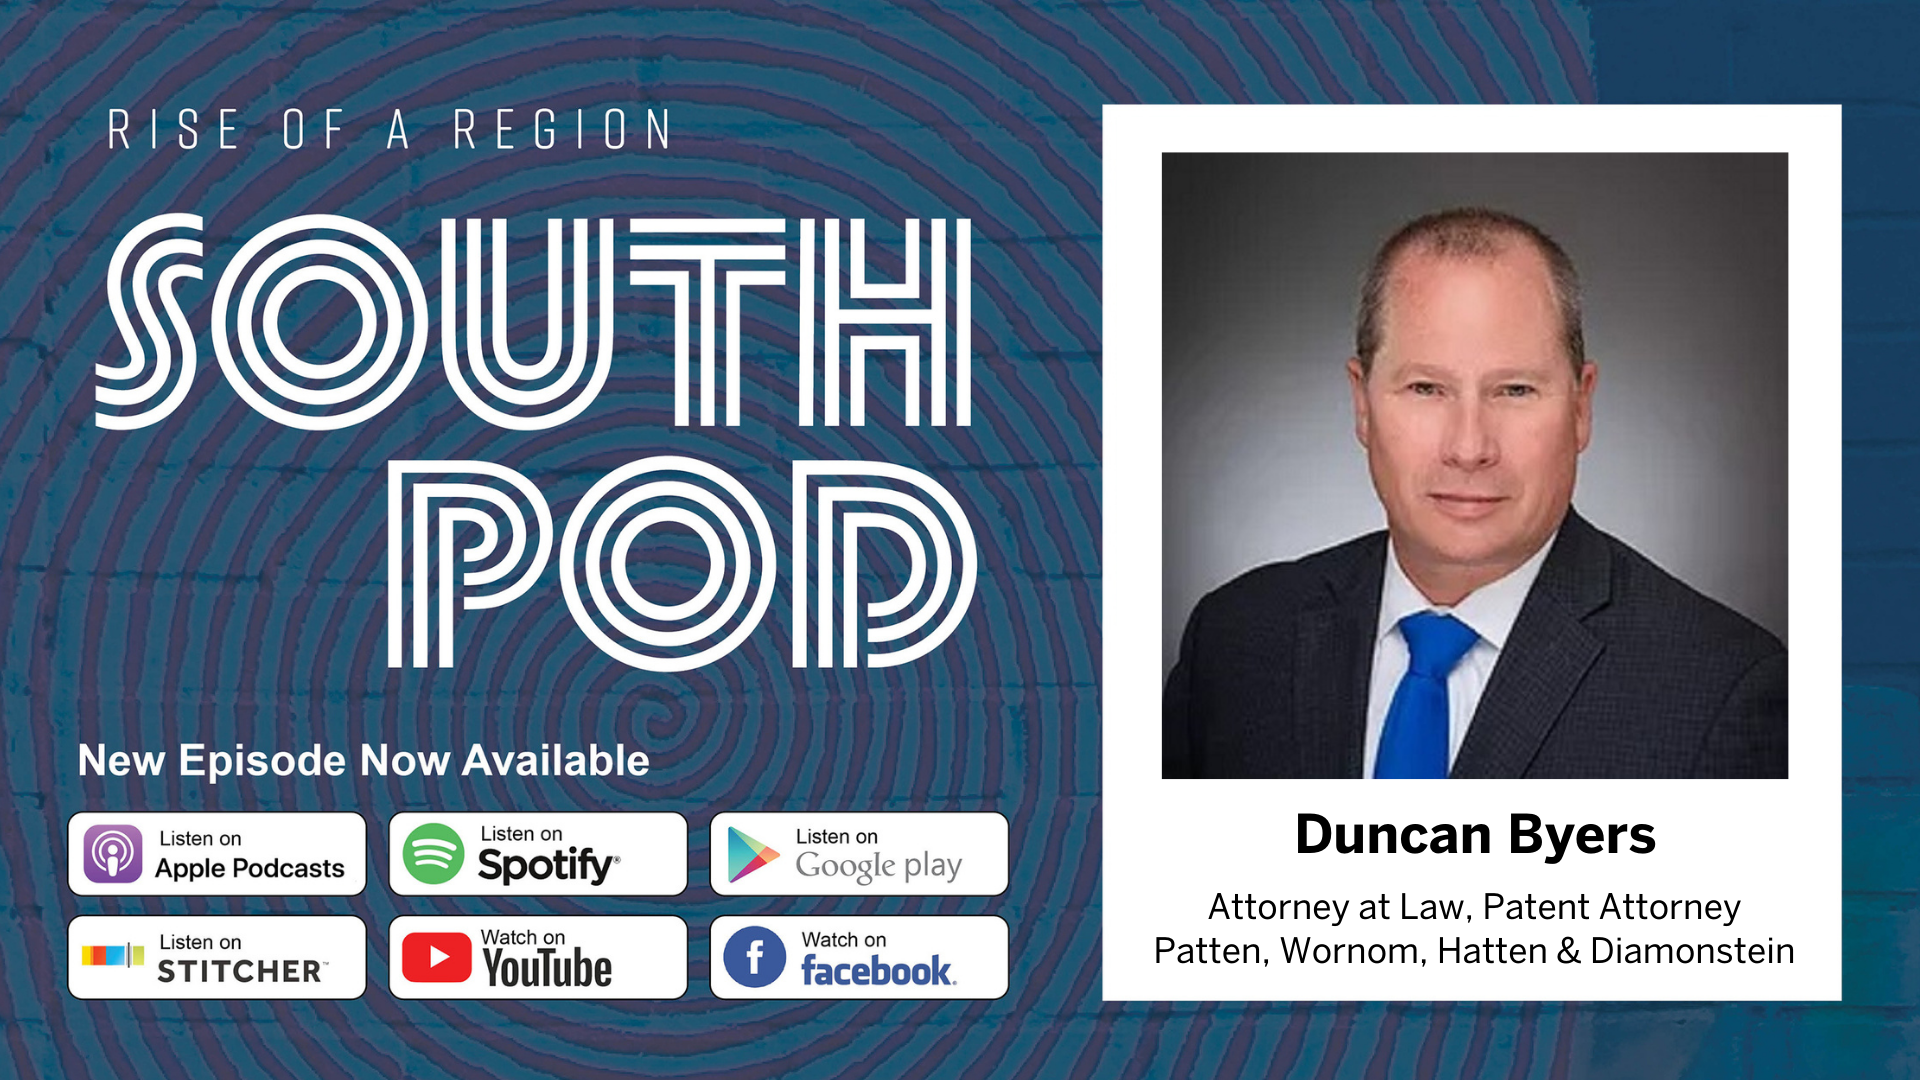 Wilmington’s Vantaca Raises $5M, Extended Reality Stages Add to Georgia’s Production Infrastructure + Duncan Byers Featured on SOUTH POD